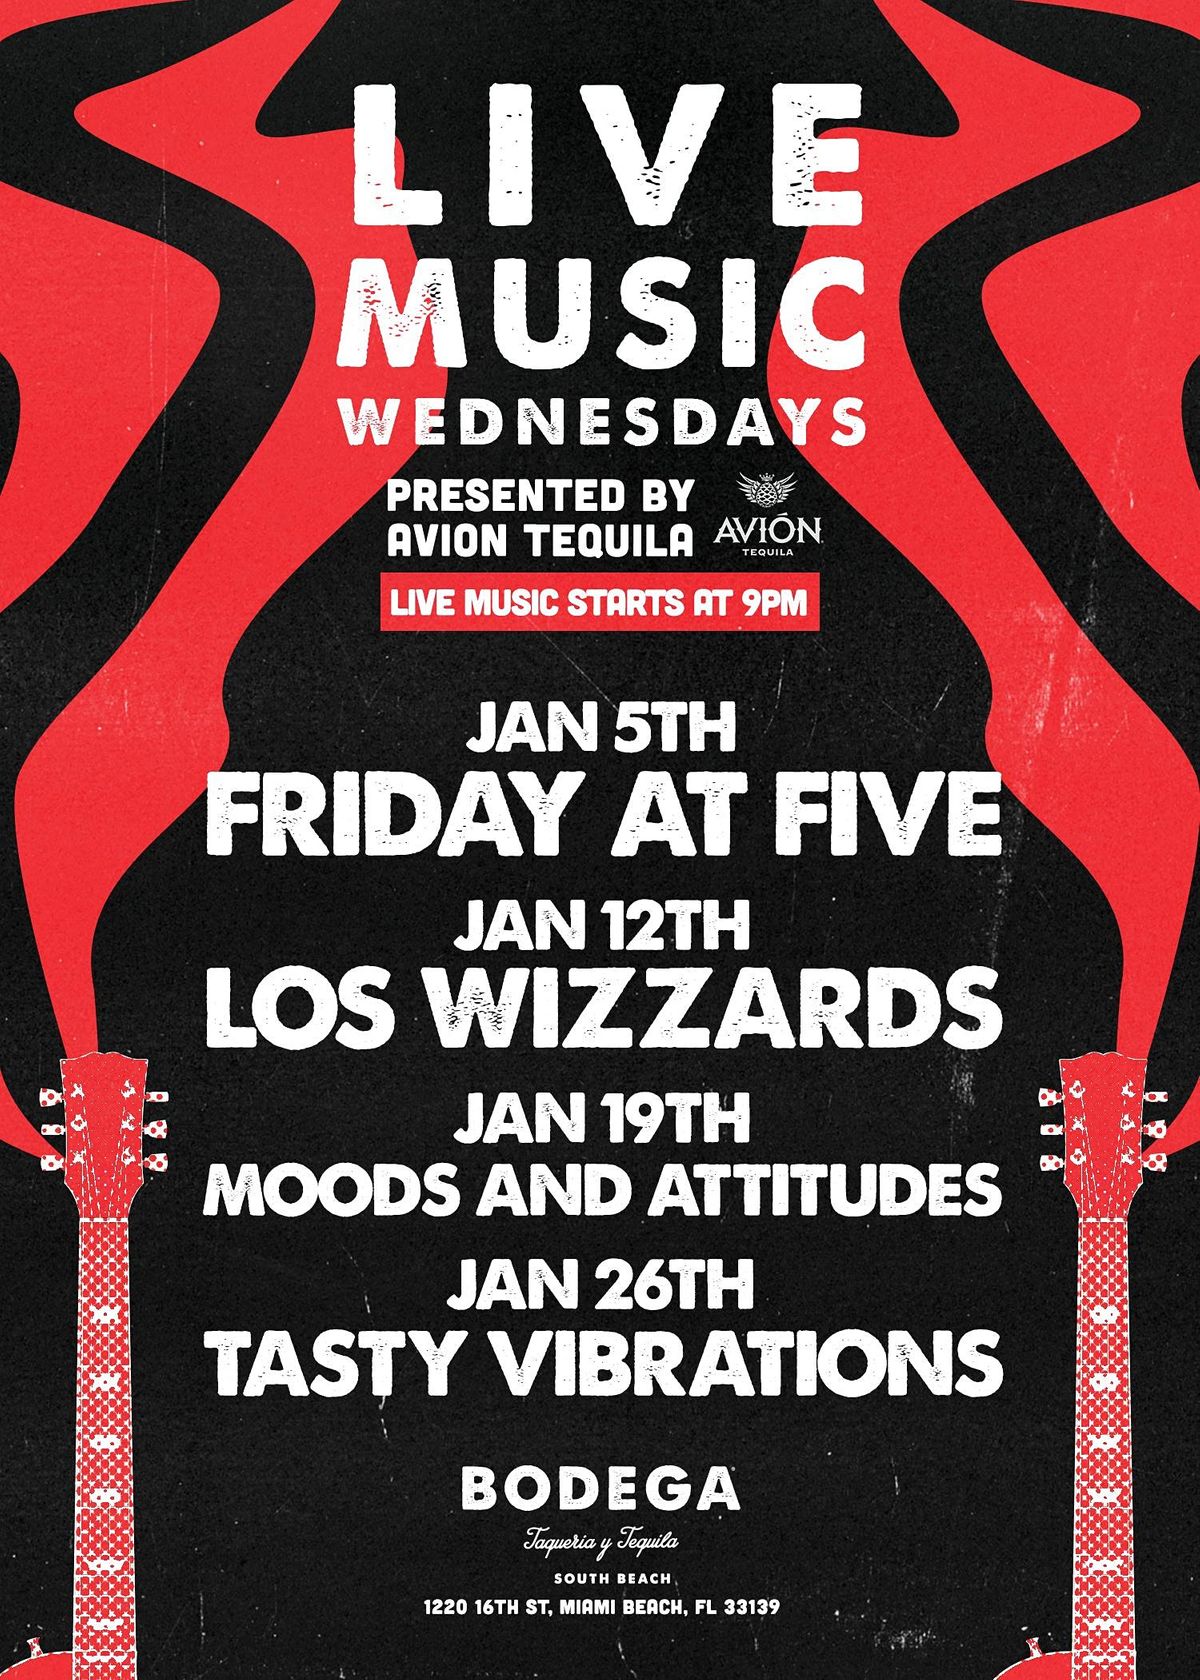 Live Music Wednesdays with Tasty Vibrations